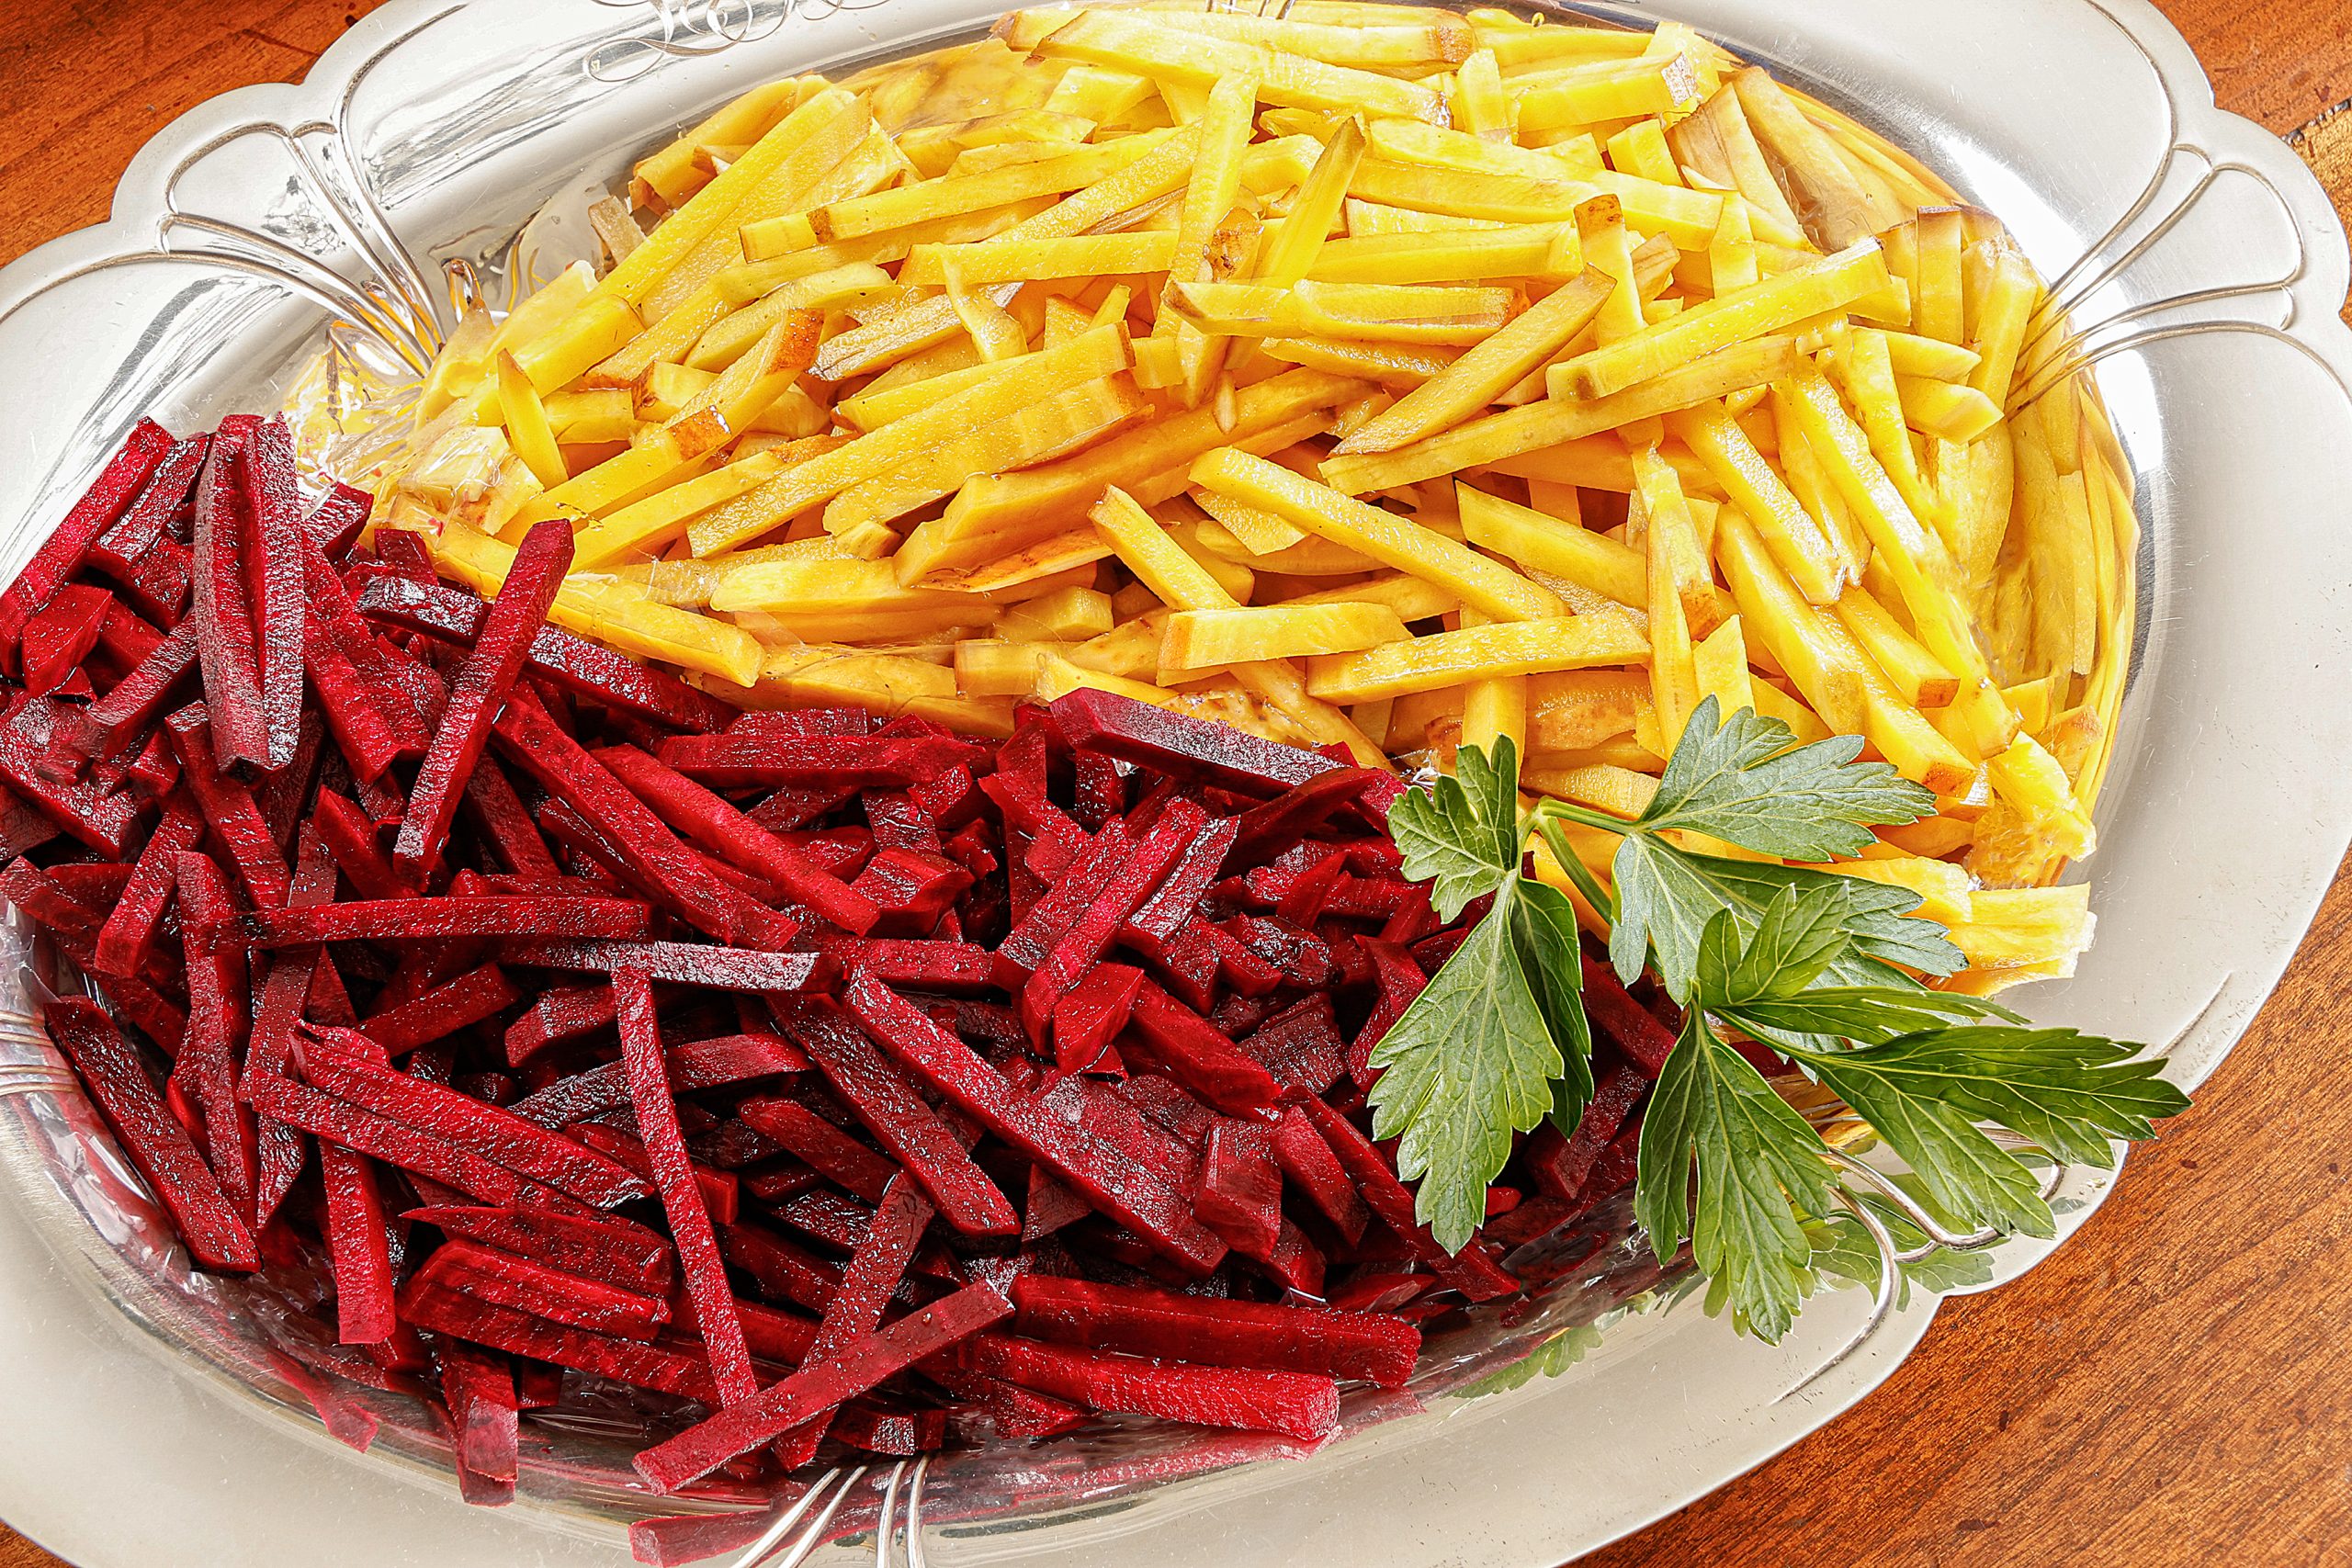 Julienne the red and yellow beets into matchsticks and keep them separate so they do not dye each other.